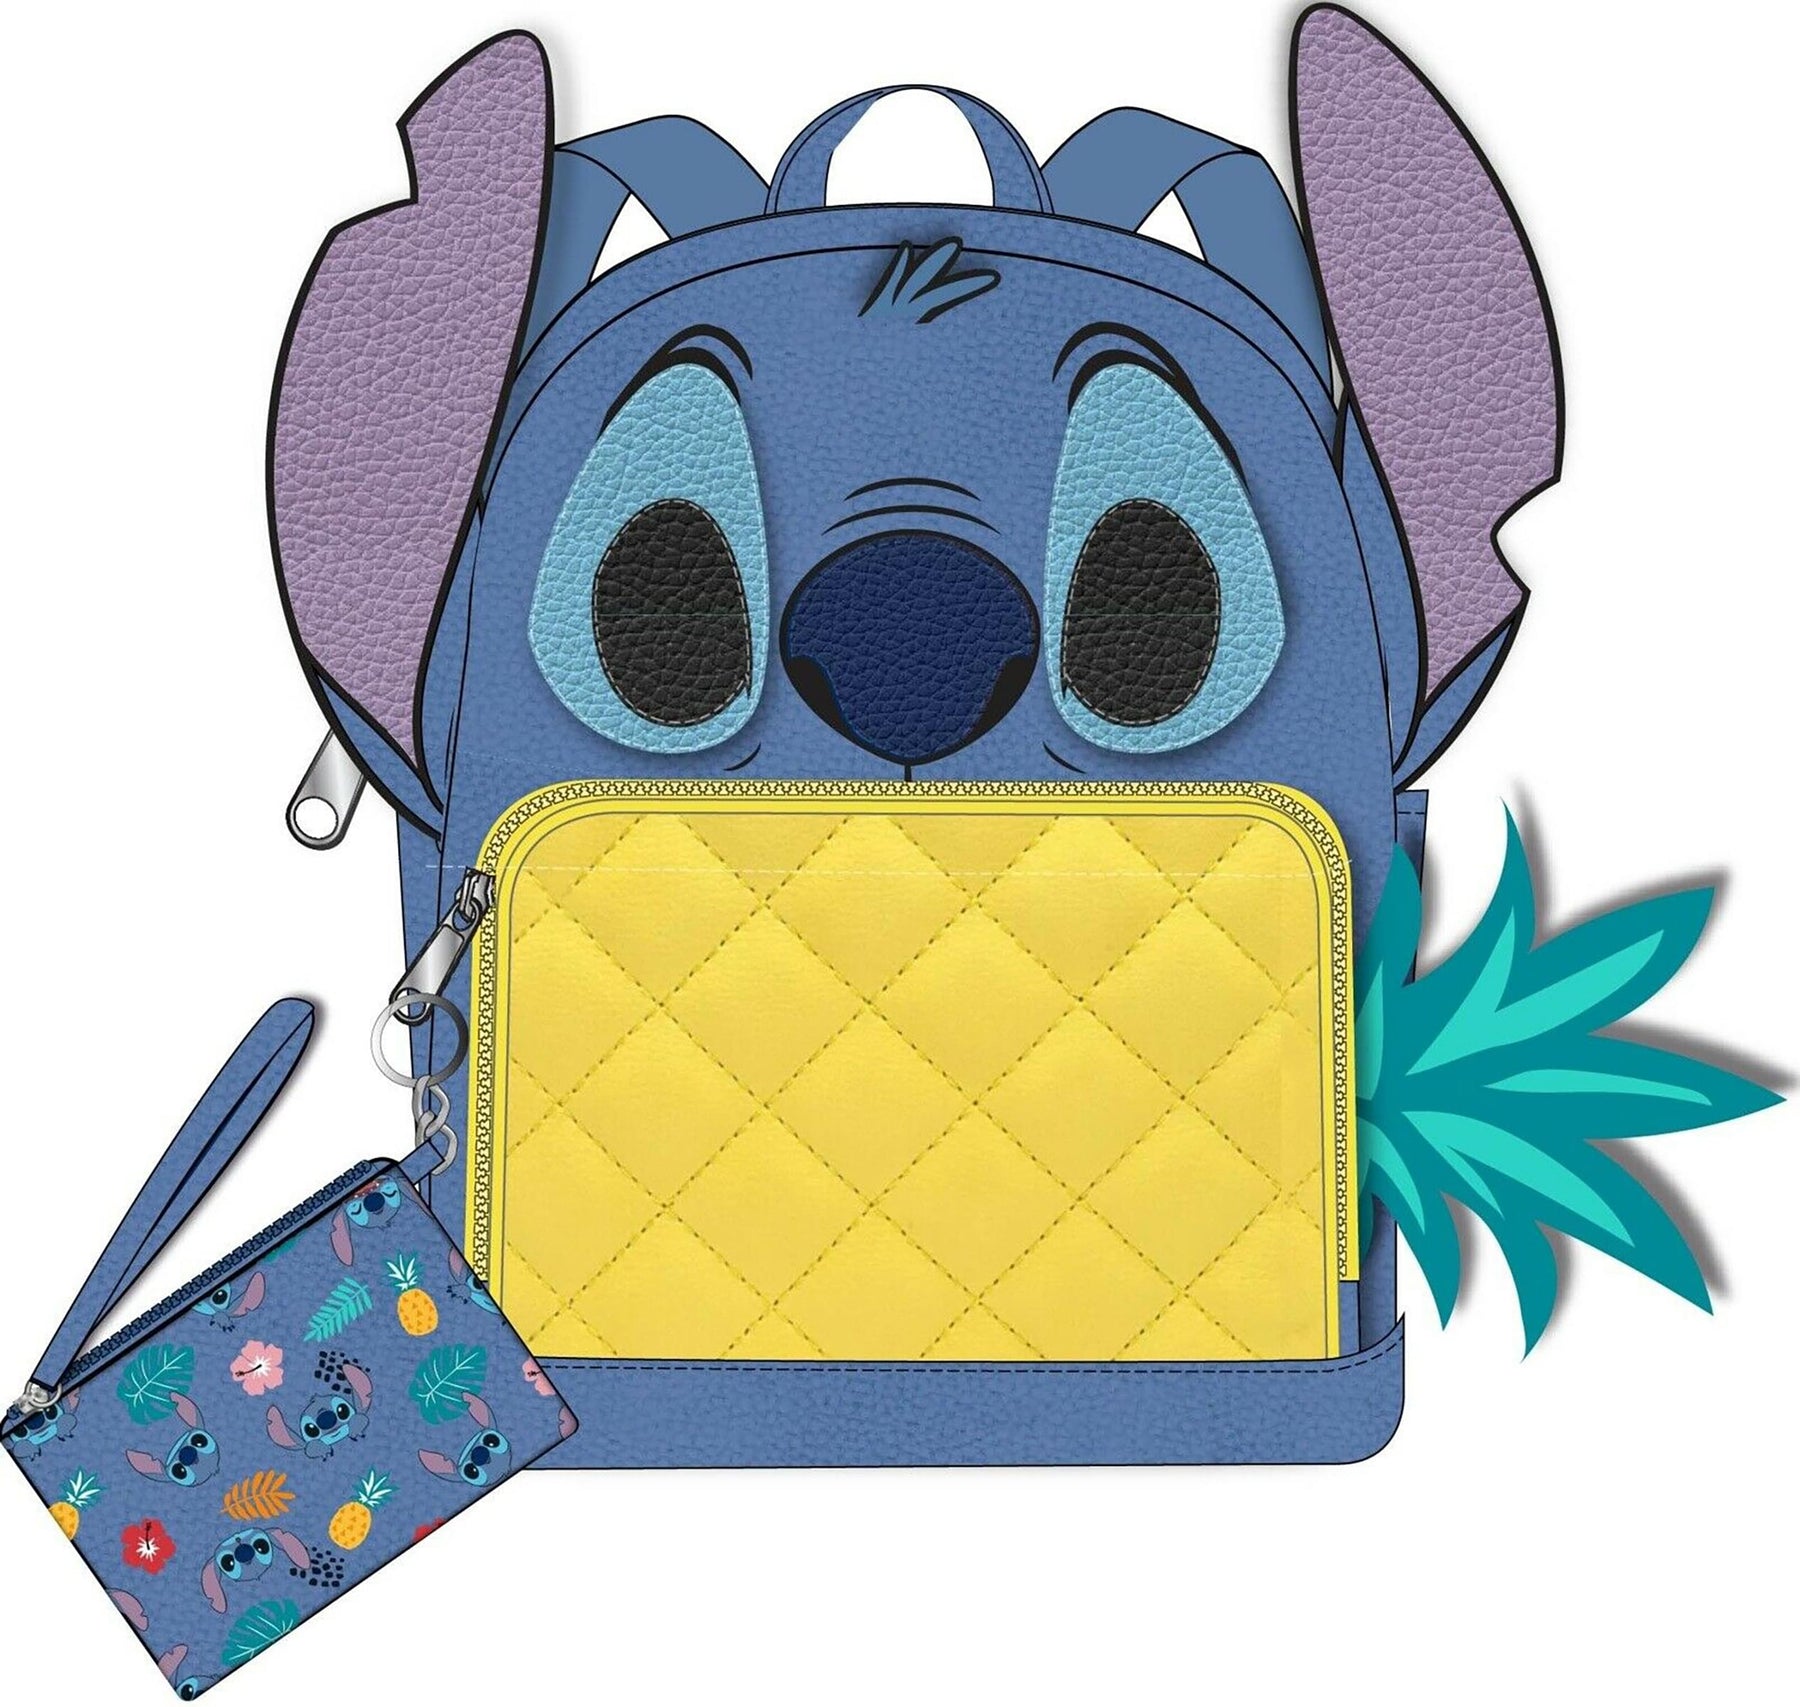 Disney Lilo & Stitch Pineapple 10 Inch Pleather Backpack w/ Coin Purse